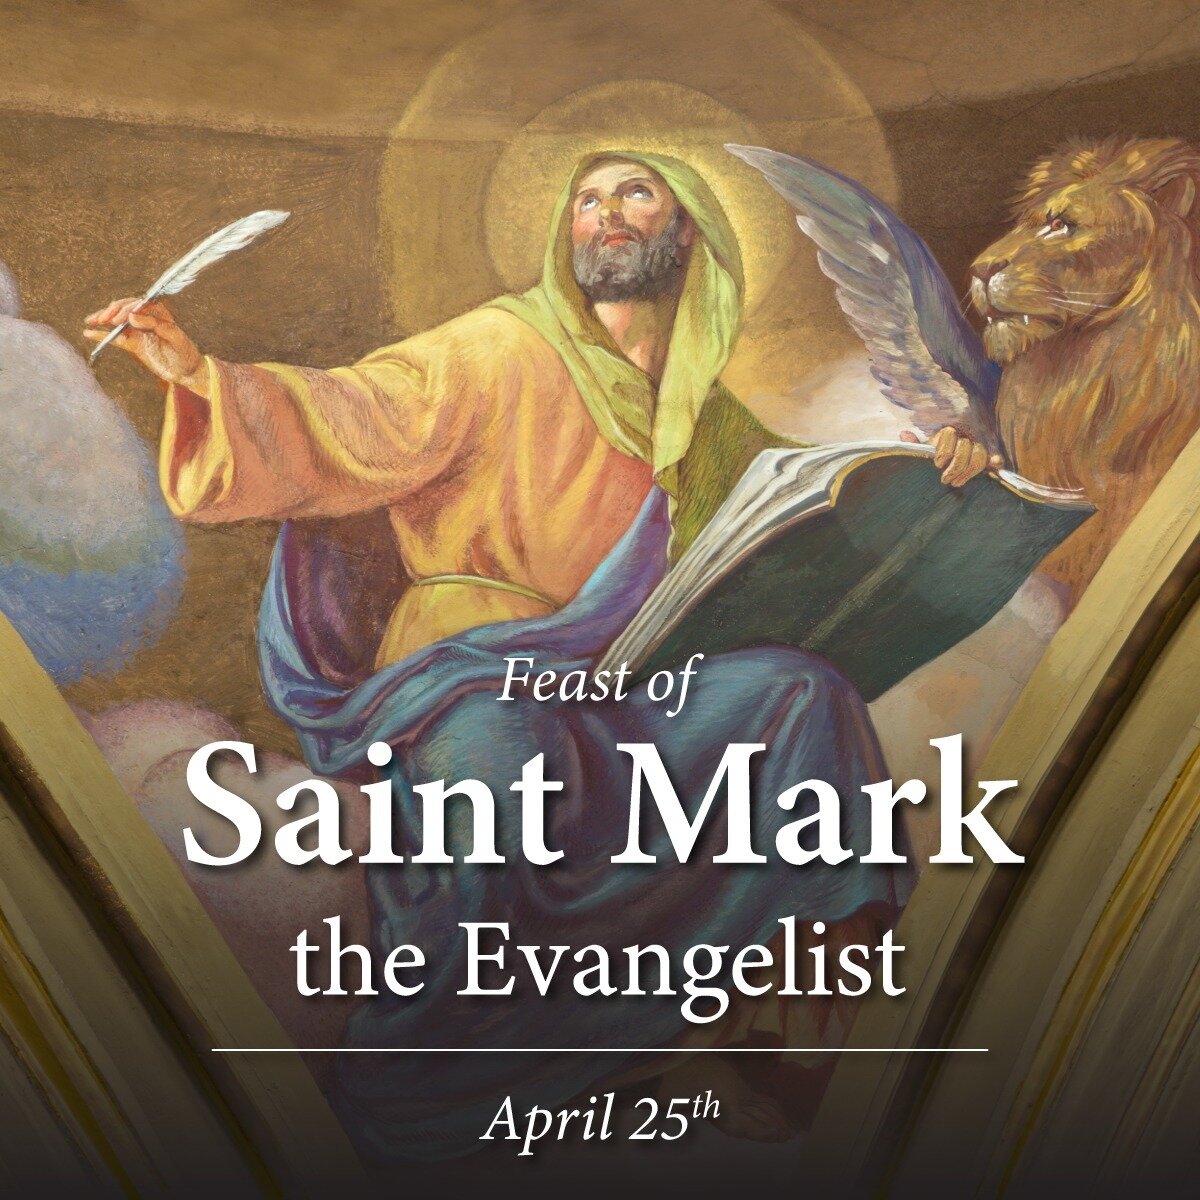 Glorious St. Mark, through the grace of God our Father, you became a great Evangelist, preaching the Good News of Christ. May you help us to know Him well so that we may faithfully live our lives as followers of Christ.

Amen.

 #feastday #prayer #st